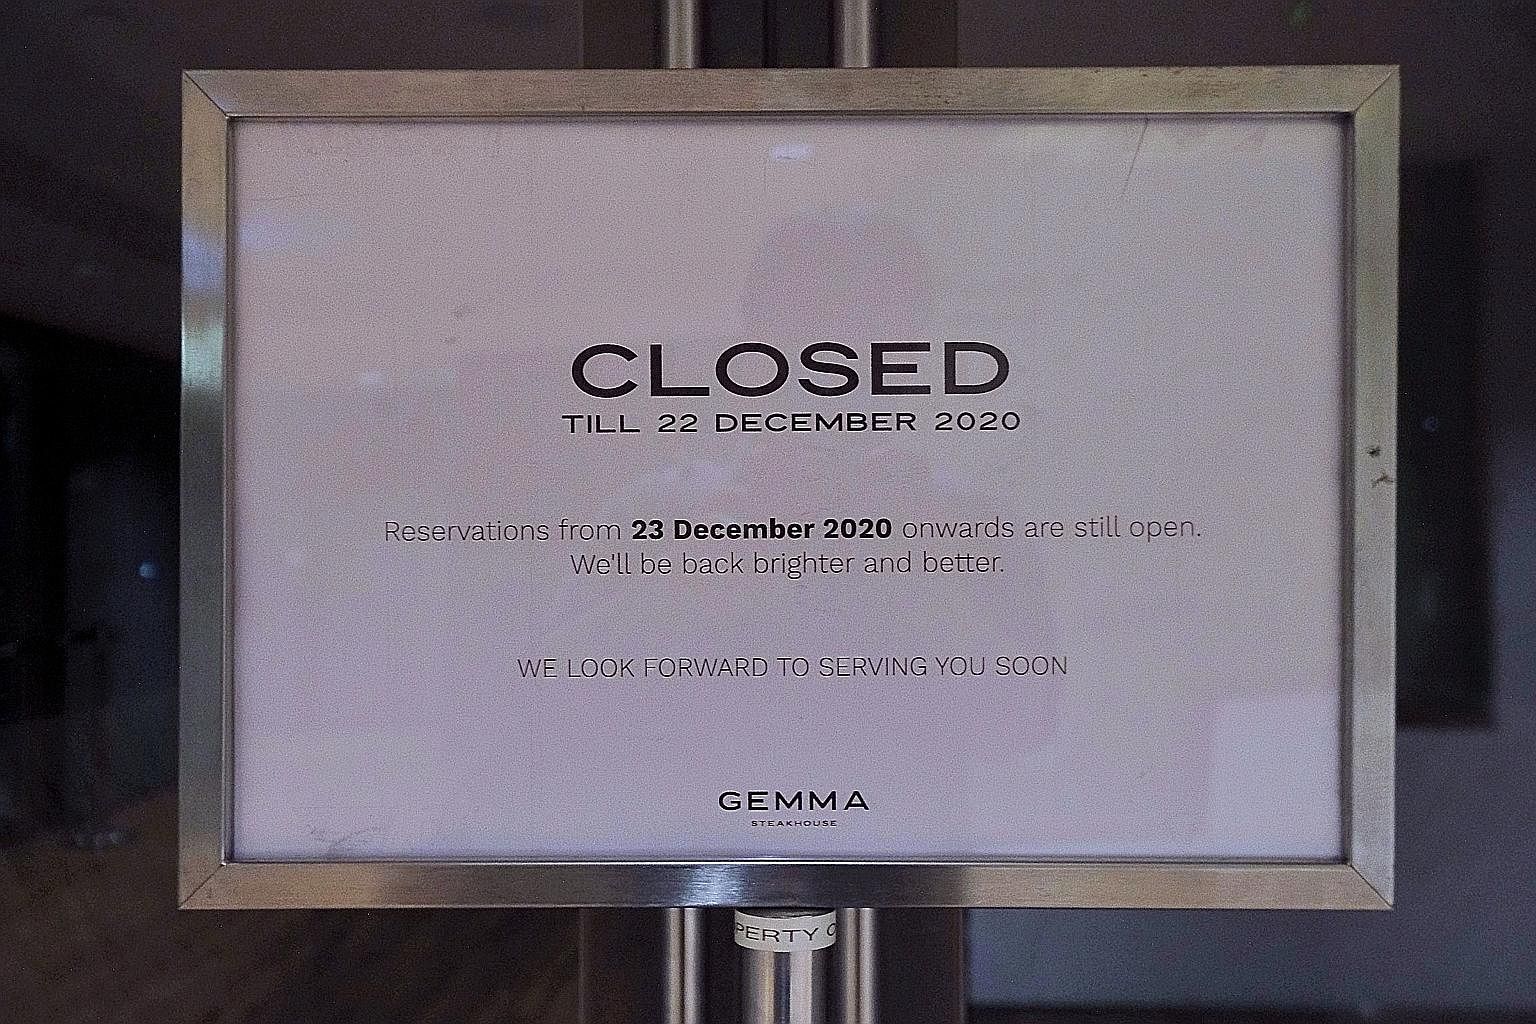 A sign outside the restaurant informing patrons it is accepting bookings for Dec 23 onwards. Gemma Steakhouse at the National Gallery Singapore has been ordered to close for 20 days until Dec 22 for accepting a large group booking and for failing to 